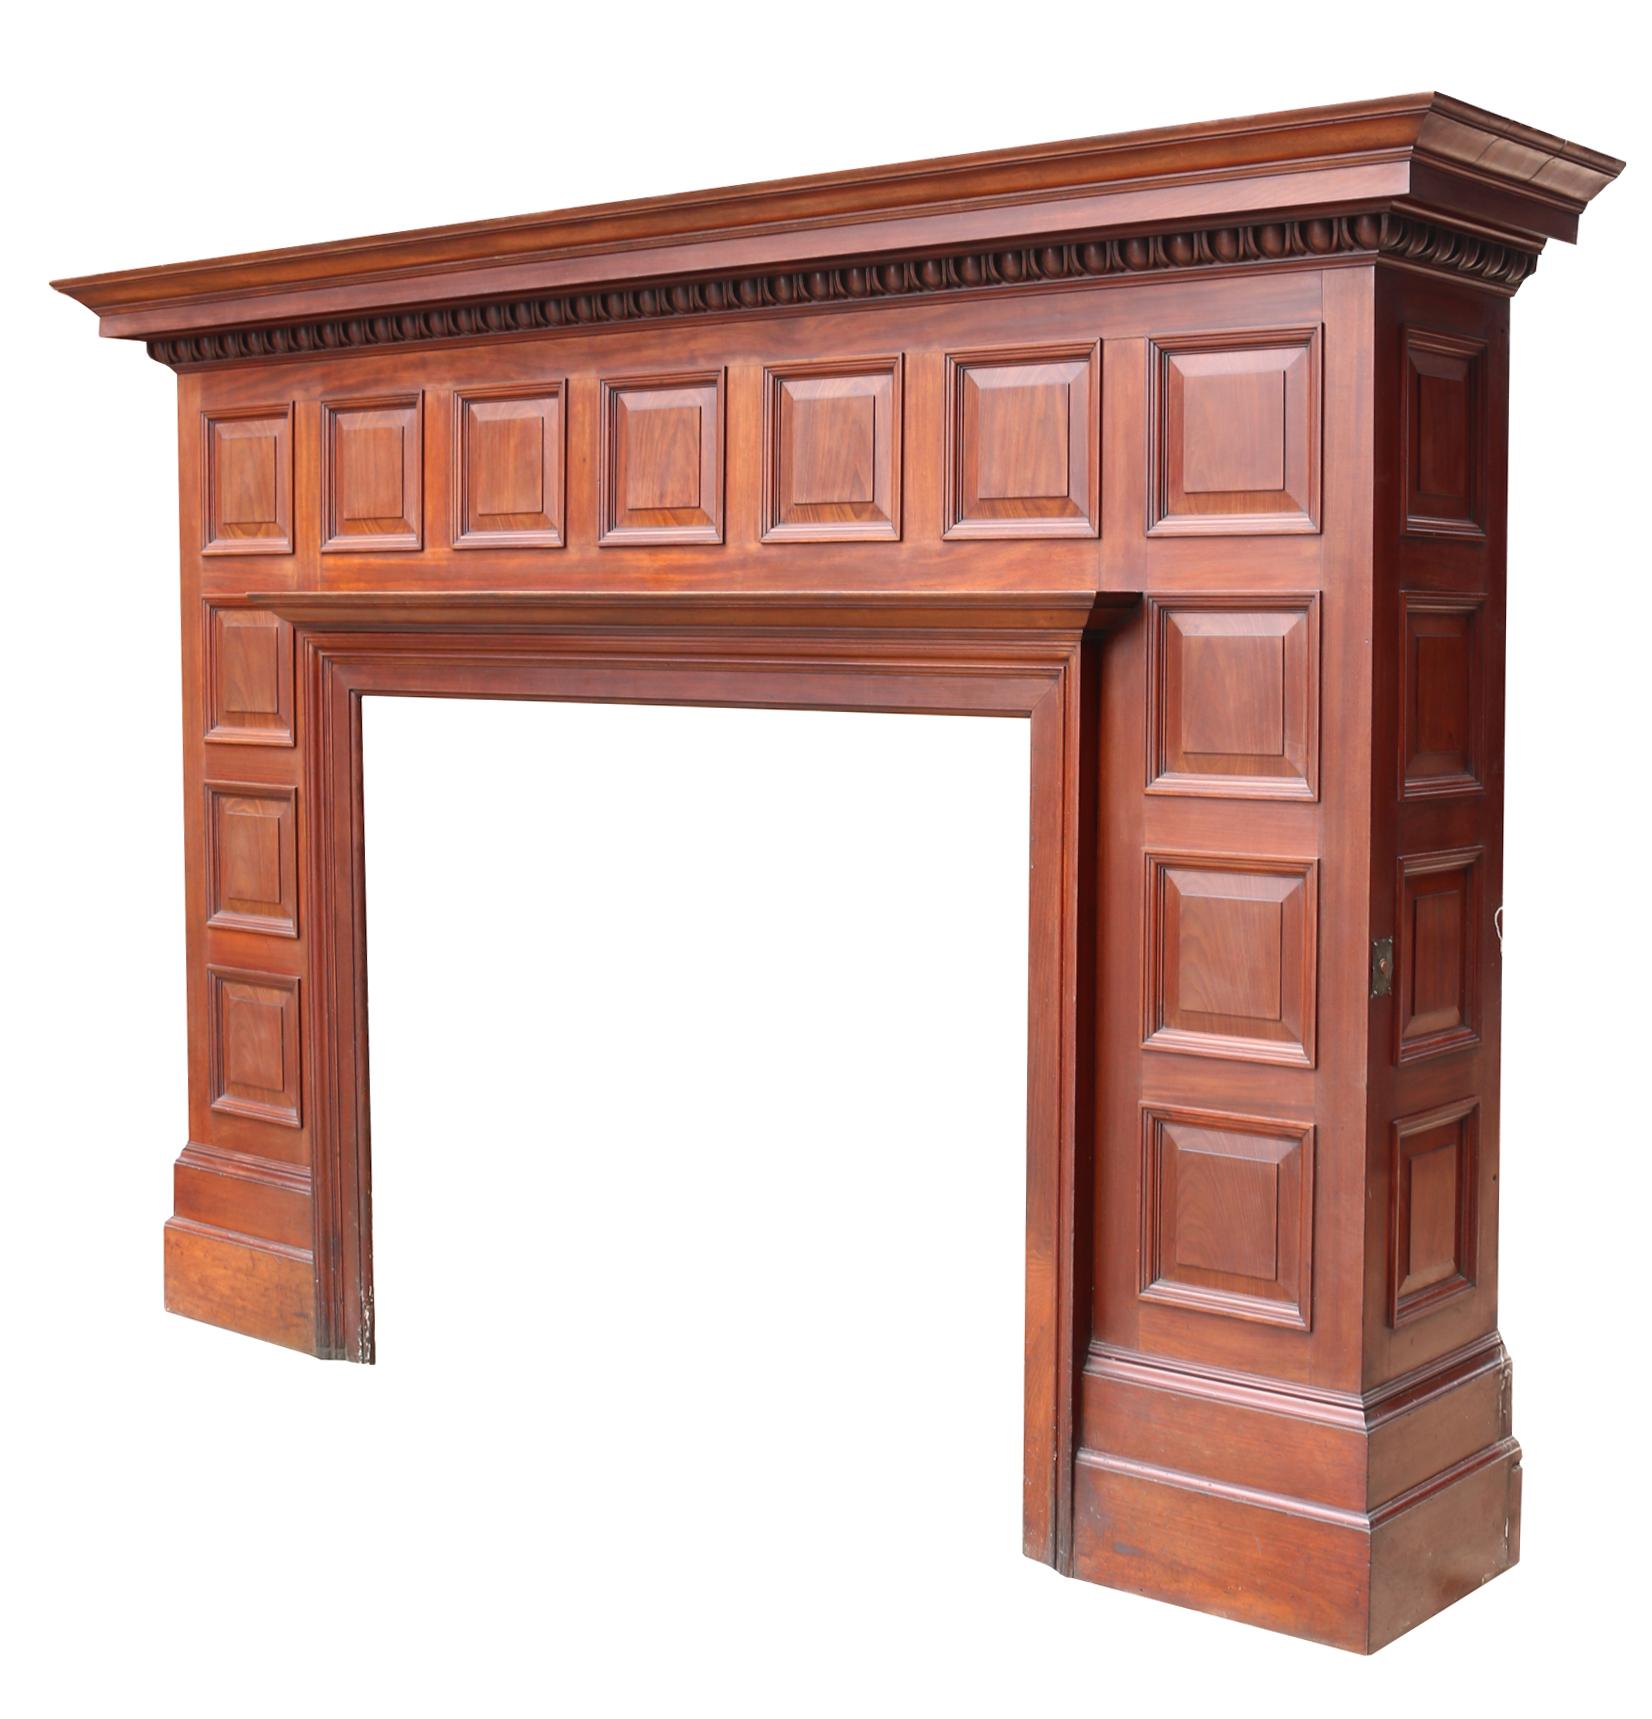 Large Edwardian Mahogany Panelled Fire Mantel In Good Condition For Sale In Wormelow, Herefordshire